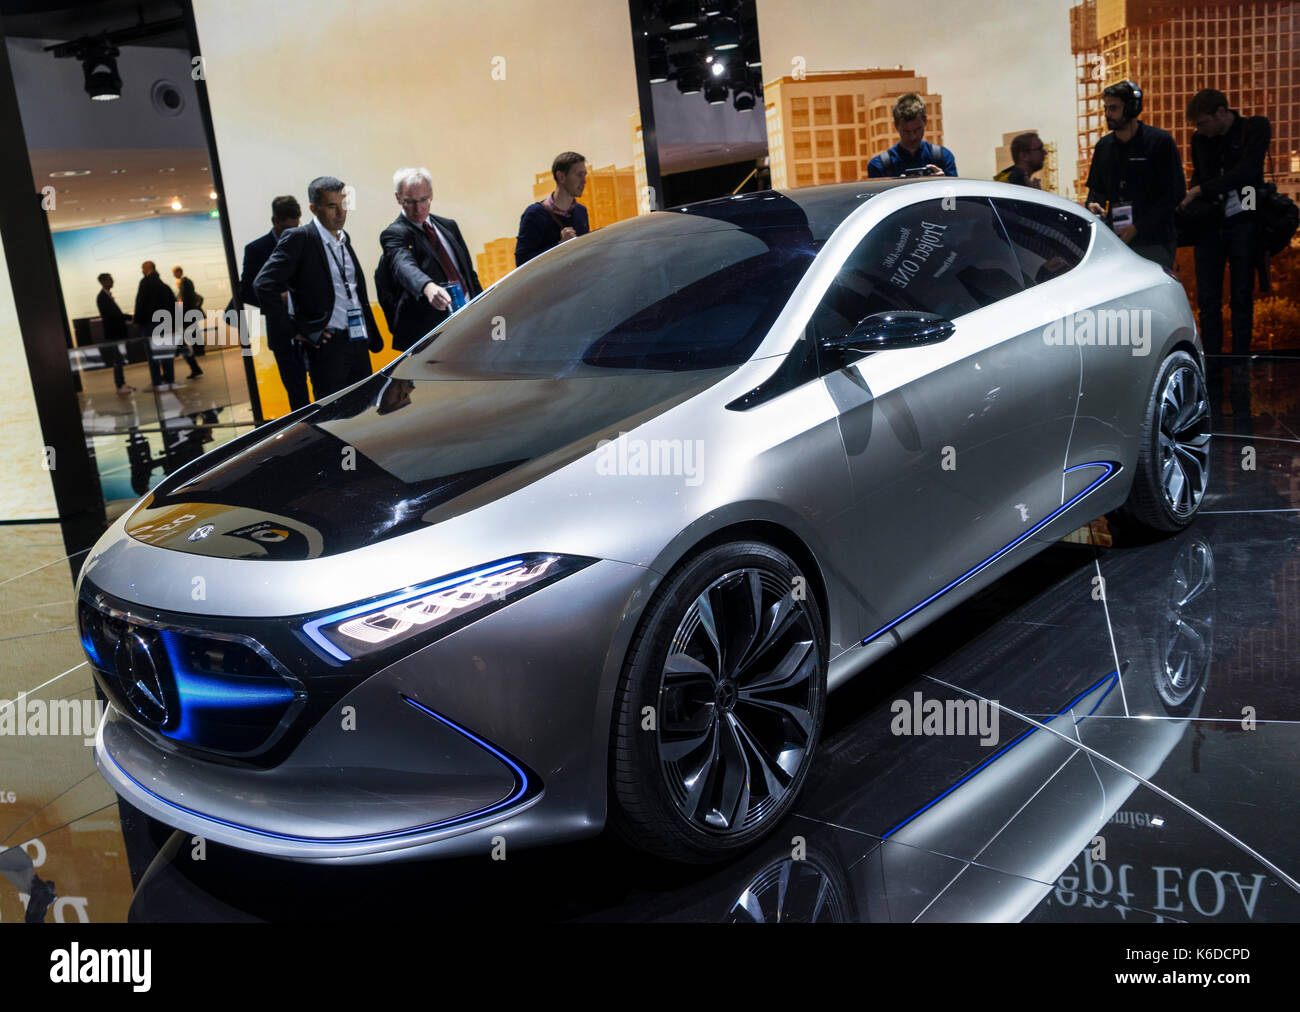 Frankfurt, Germany. , . Frankfurt Motor Show 2017 press day previewing latest vehicles at world's largest motor show. World Premiere of Mercedes EQA electric concept vehicle. Credit: Iain Masterton/Alamy Live News Stock Photo